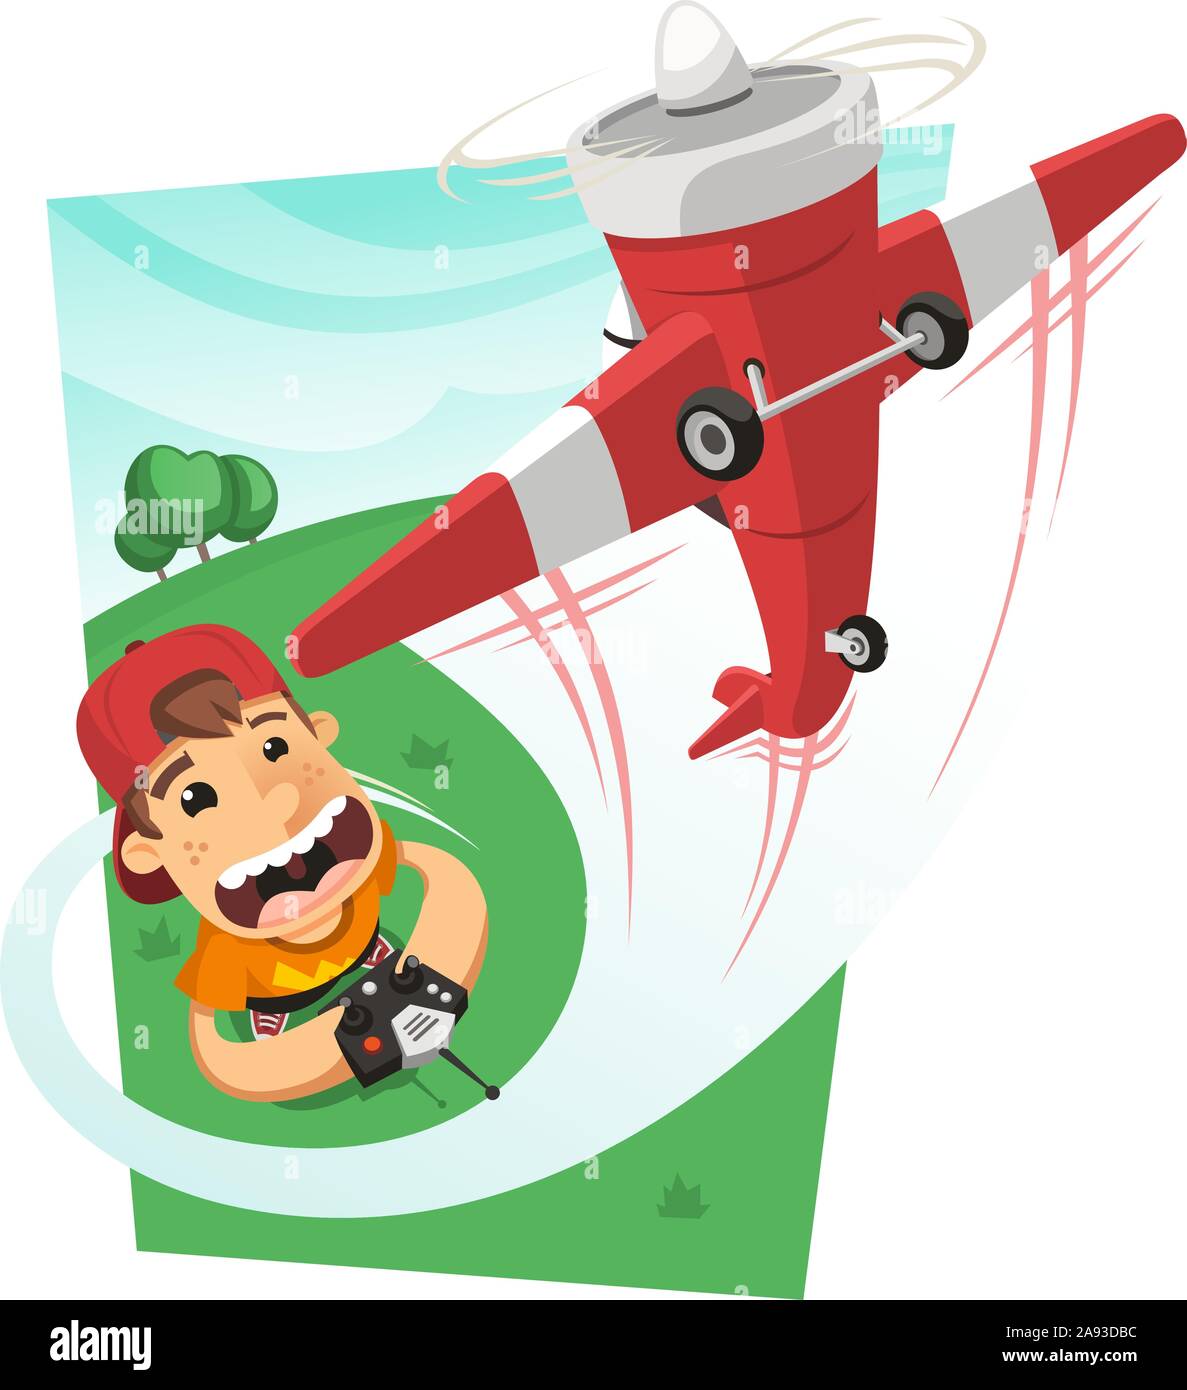 Boy playing with a radio control airplane in the park, vector illustration cartoon. Stock Vector